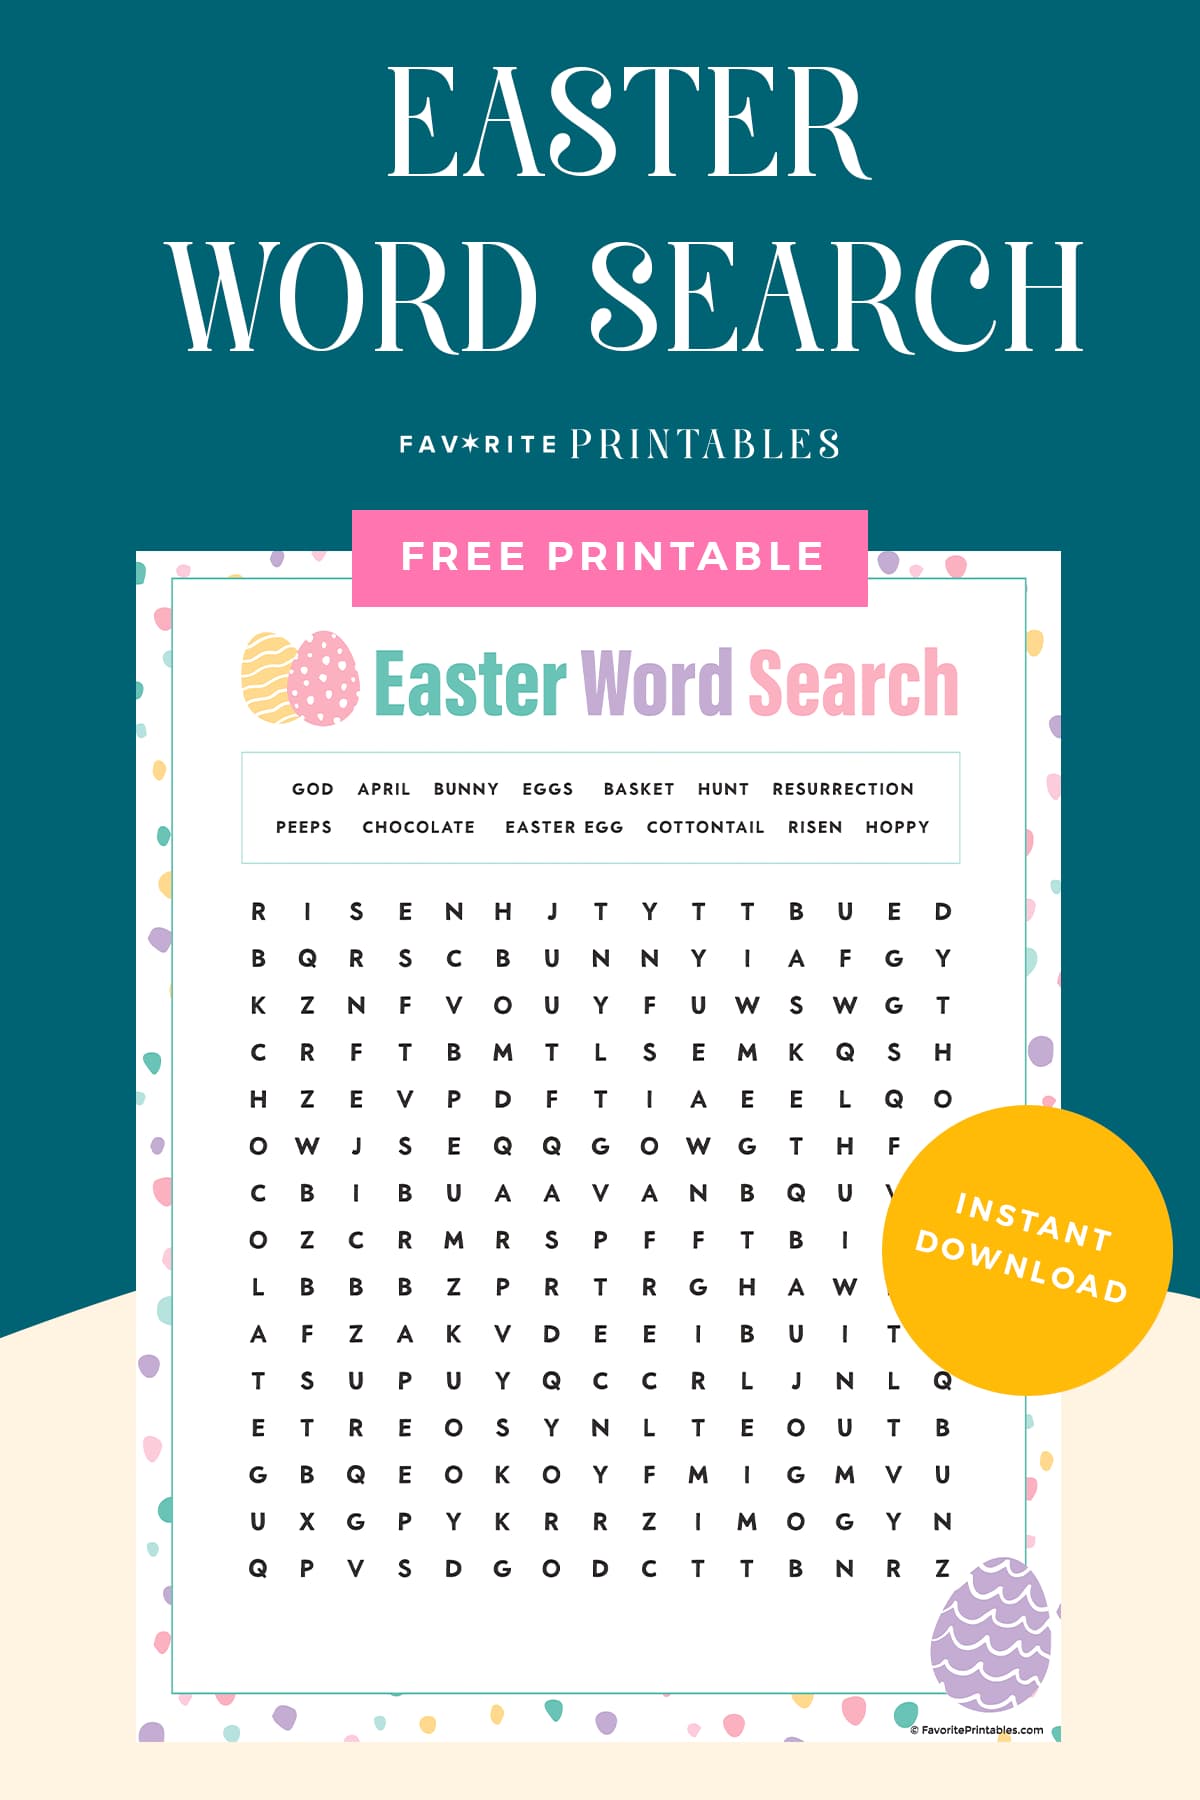 Easter word search printable pin.